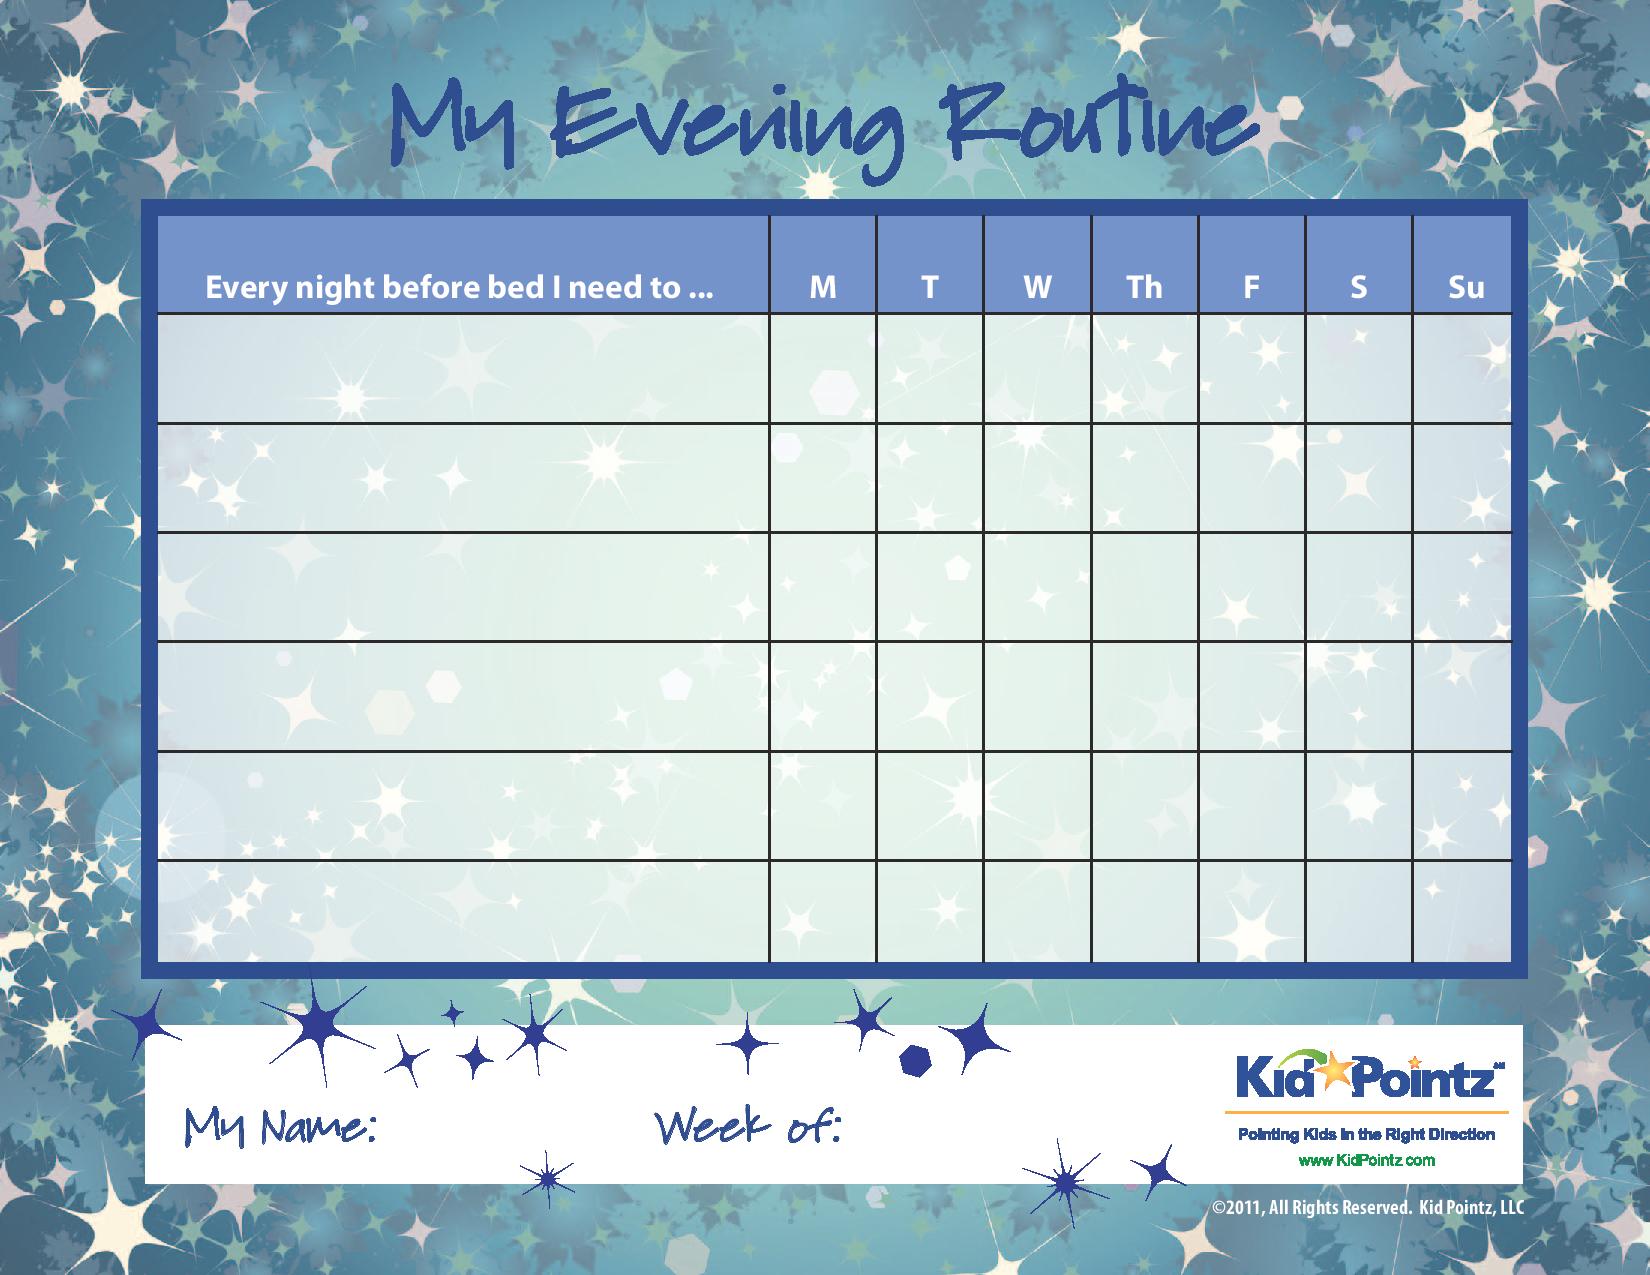 plan-your-routine-with-daily-routine-tracker-printable-daily-routine